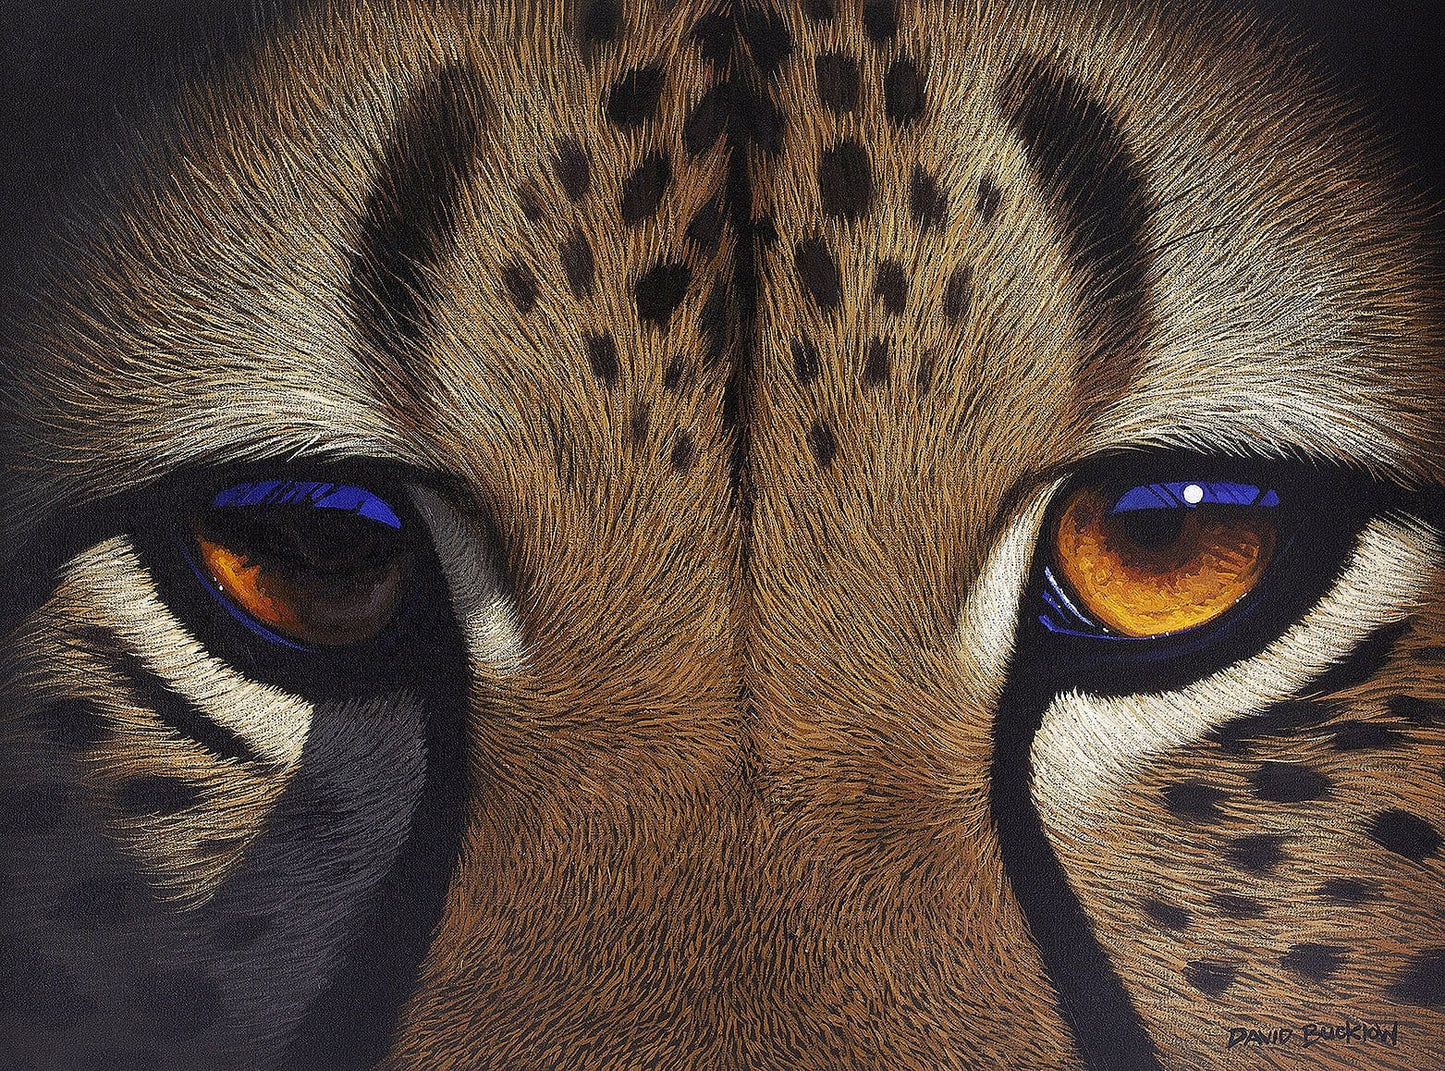 A fine art print of a cheetah's eyes up close painted by artist David Bucklow